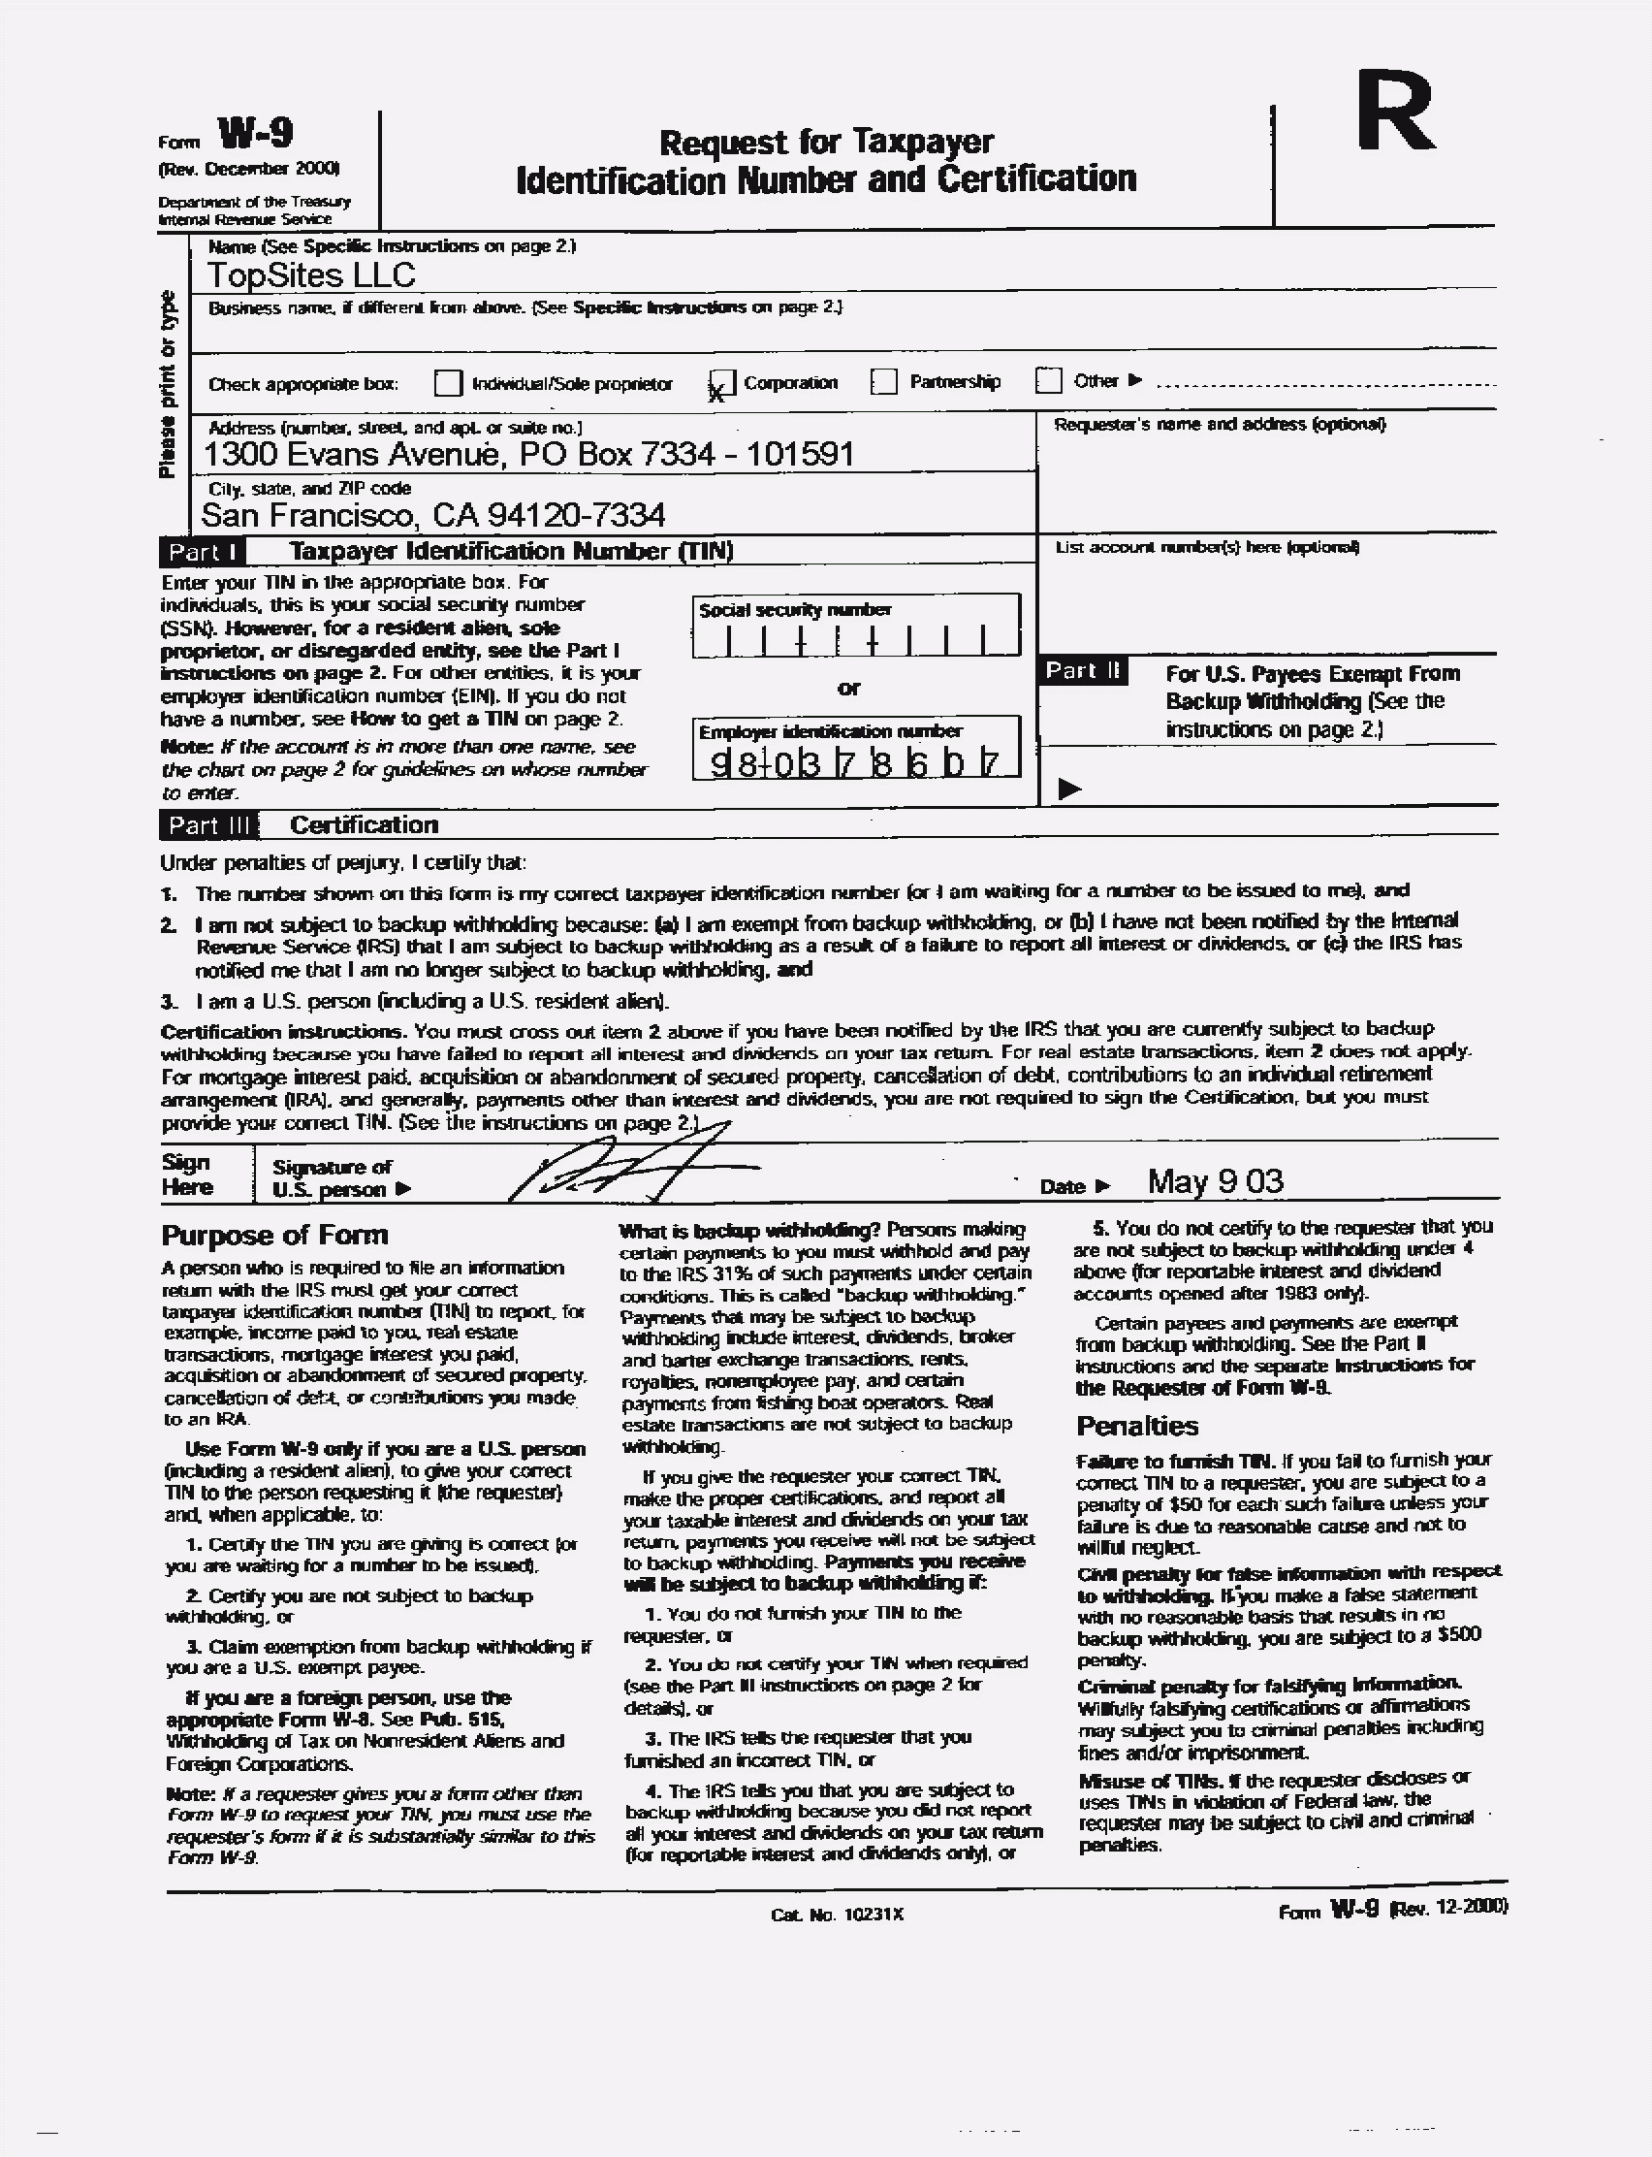 55 Excellent W 9 Printable Tax Form For Photos